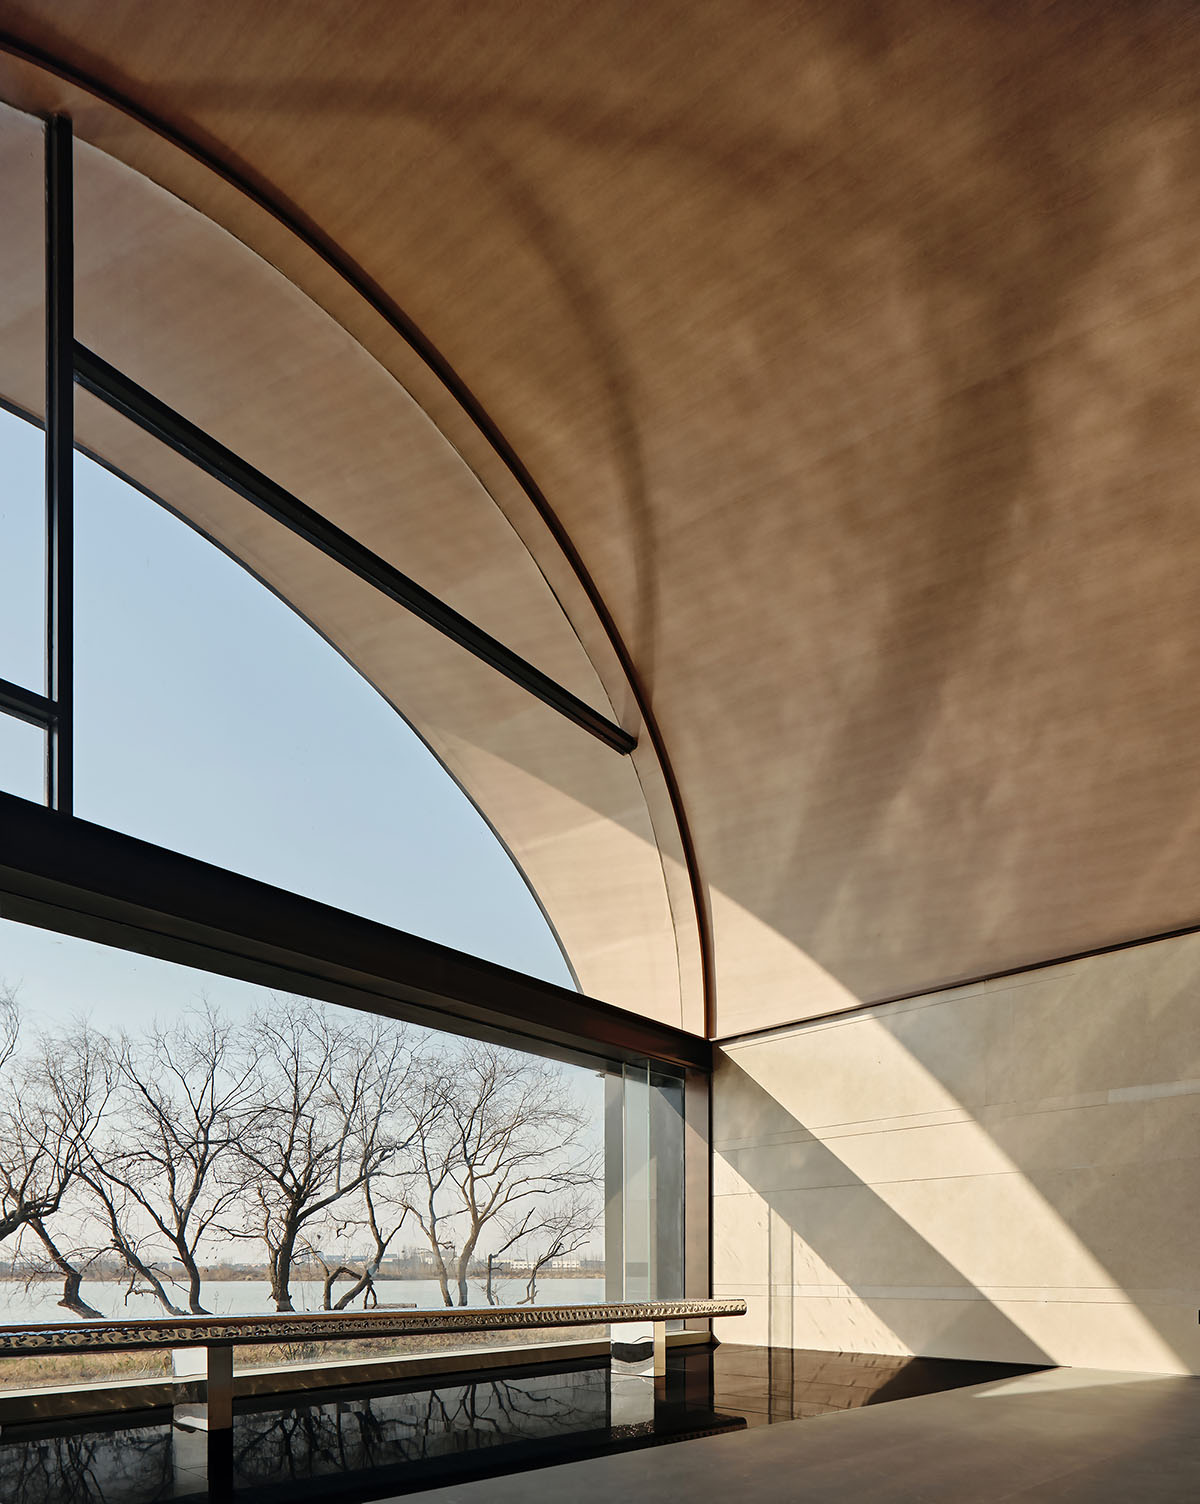 WJ STUDIO completes interiors of vaulted-roof Boatyard Hotel towards the river in Suzhou